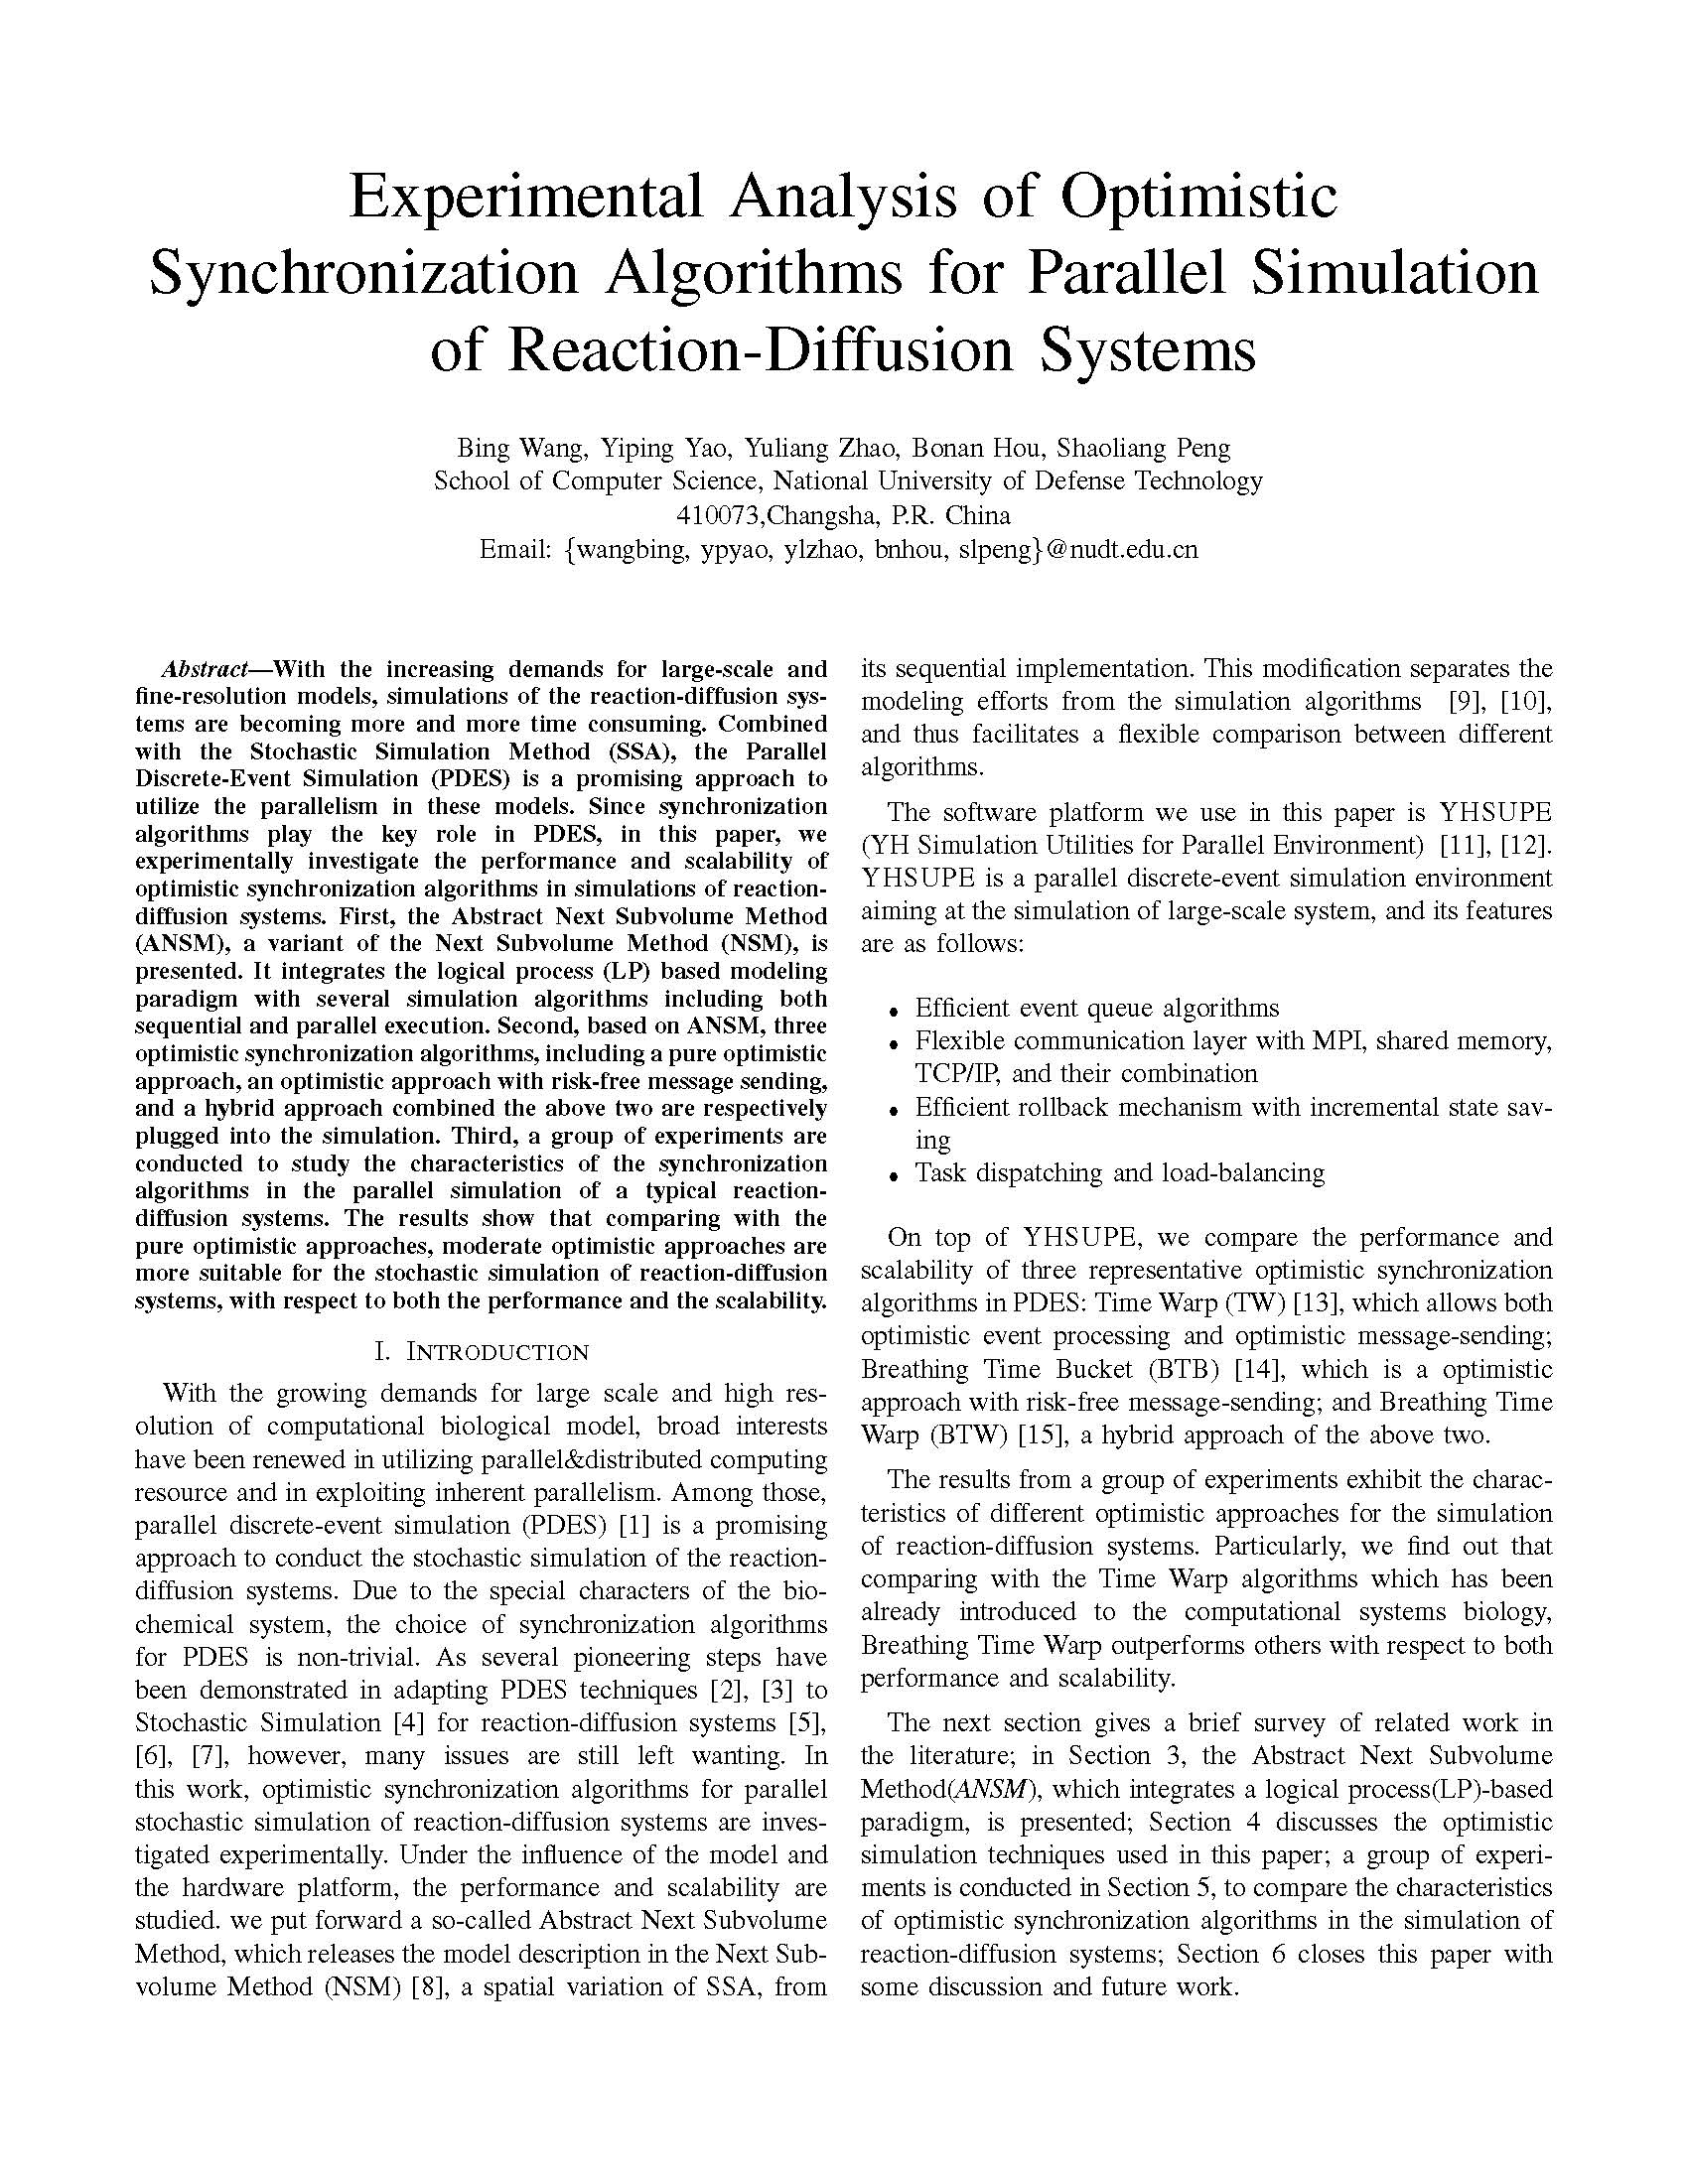 [37] Wang, B., Yao, Y., Zhao, Y.,Hou, B., & Peng, S.* (2009, October). Experimental analysis of optimistic synchronization algorithms for parallel simulation ofreaction-diffusion systems. In 2009 International Workshop on High Performance Computational Systems Biology (pp. 91-100). IEEE.（并列通讯作者）